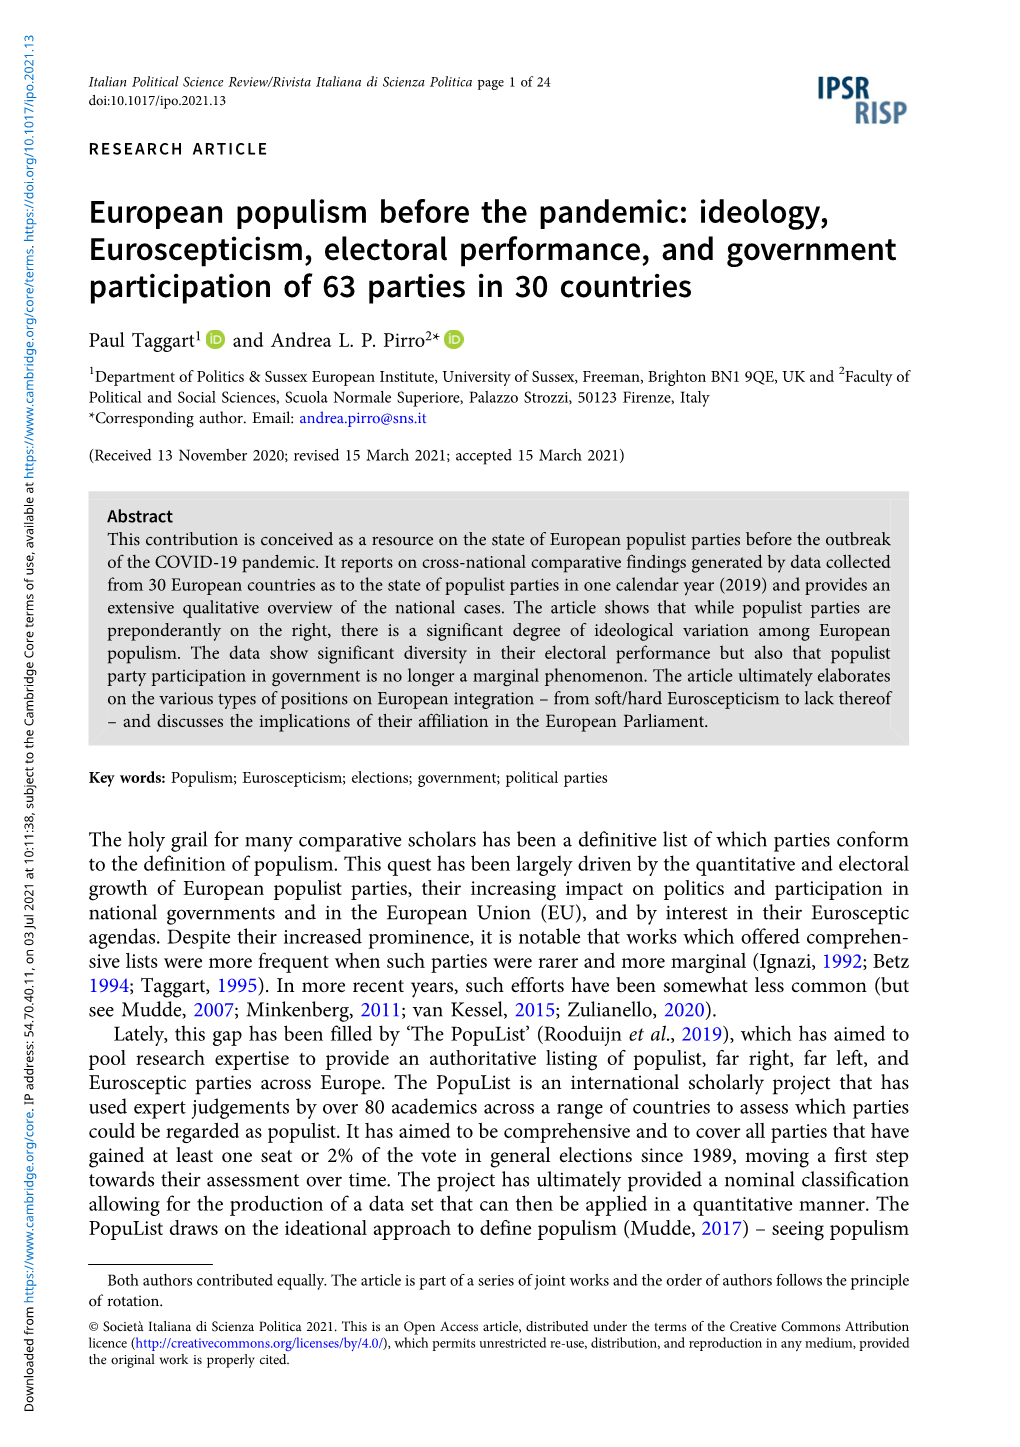 Ideology, Euroscepticism, Electoral Performance, and Government Participation of 63 Parties in 30 Countries